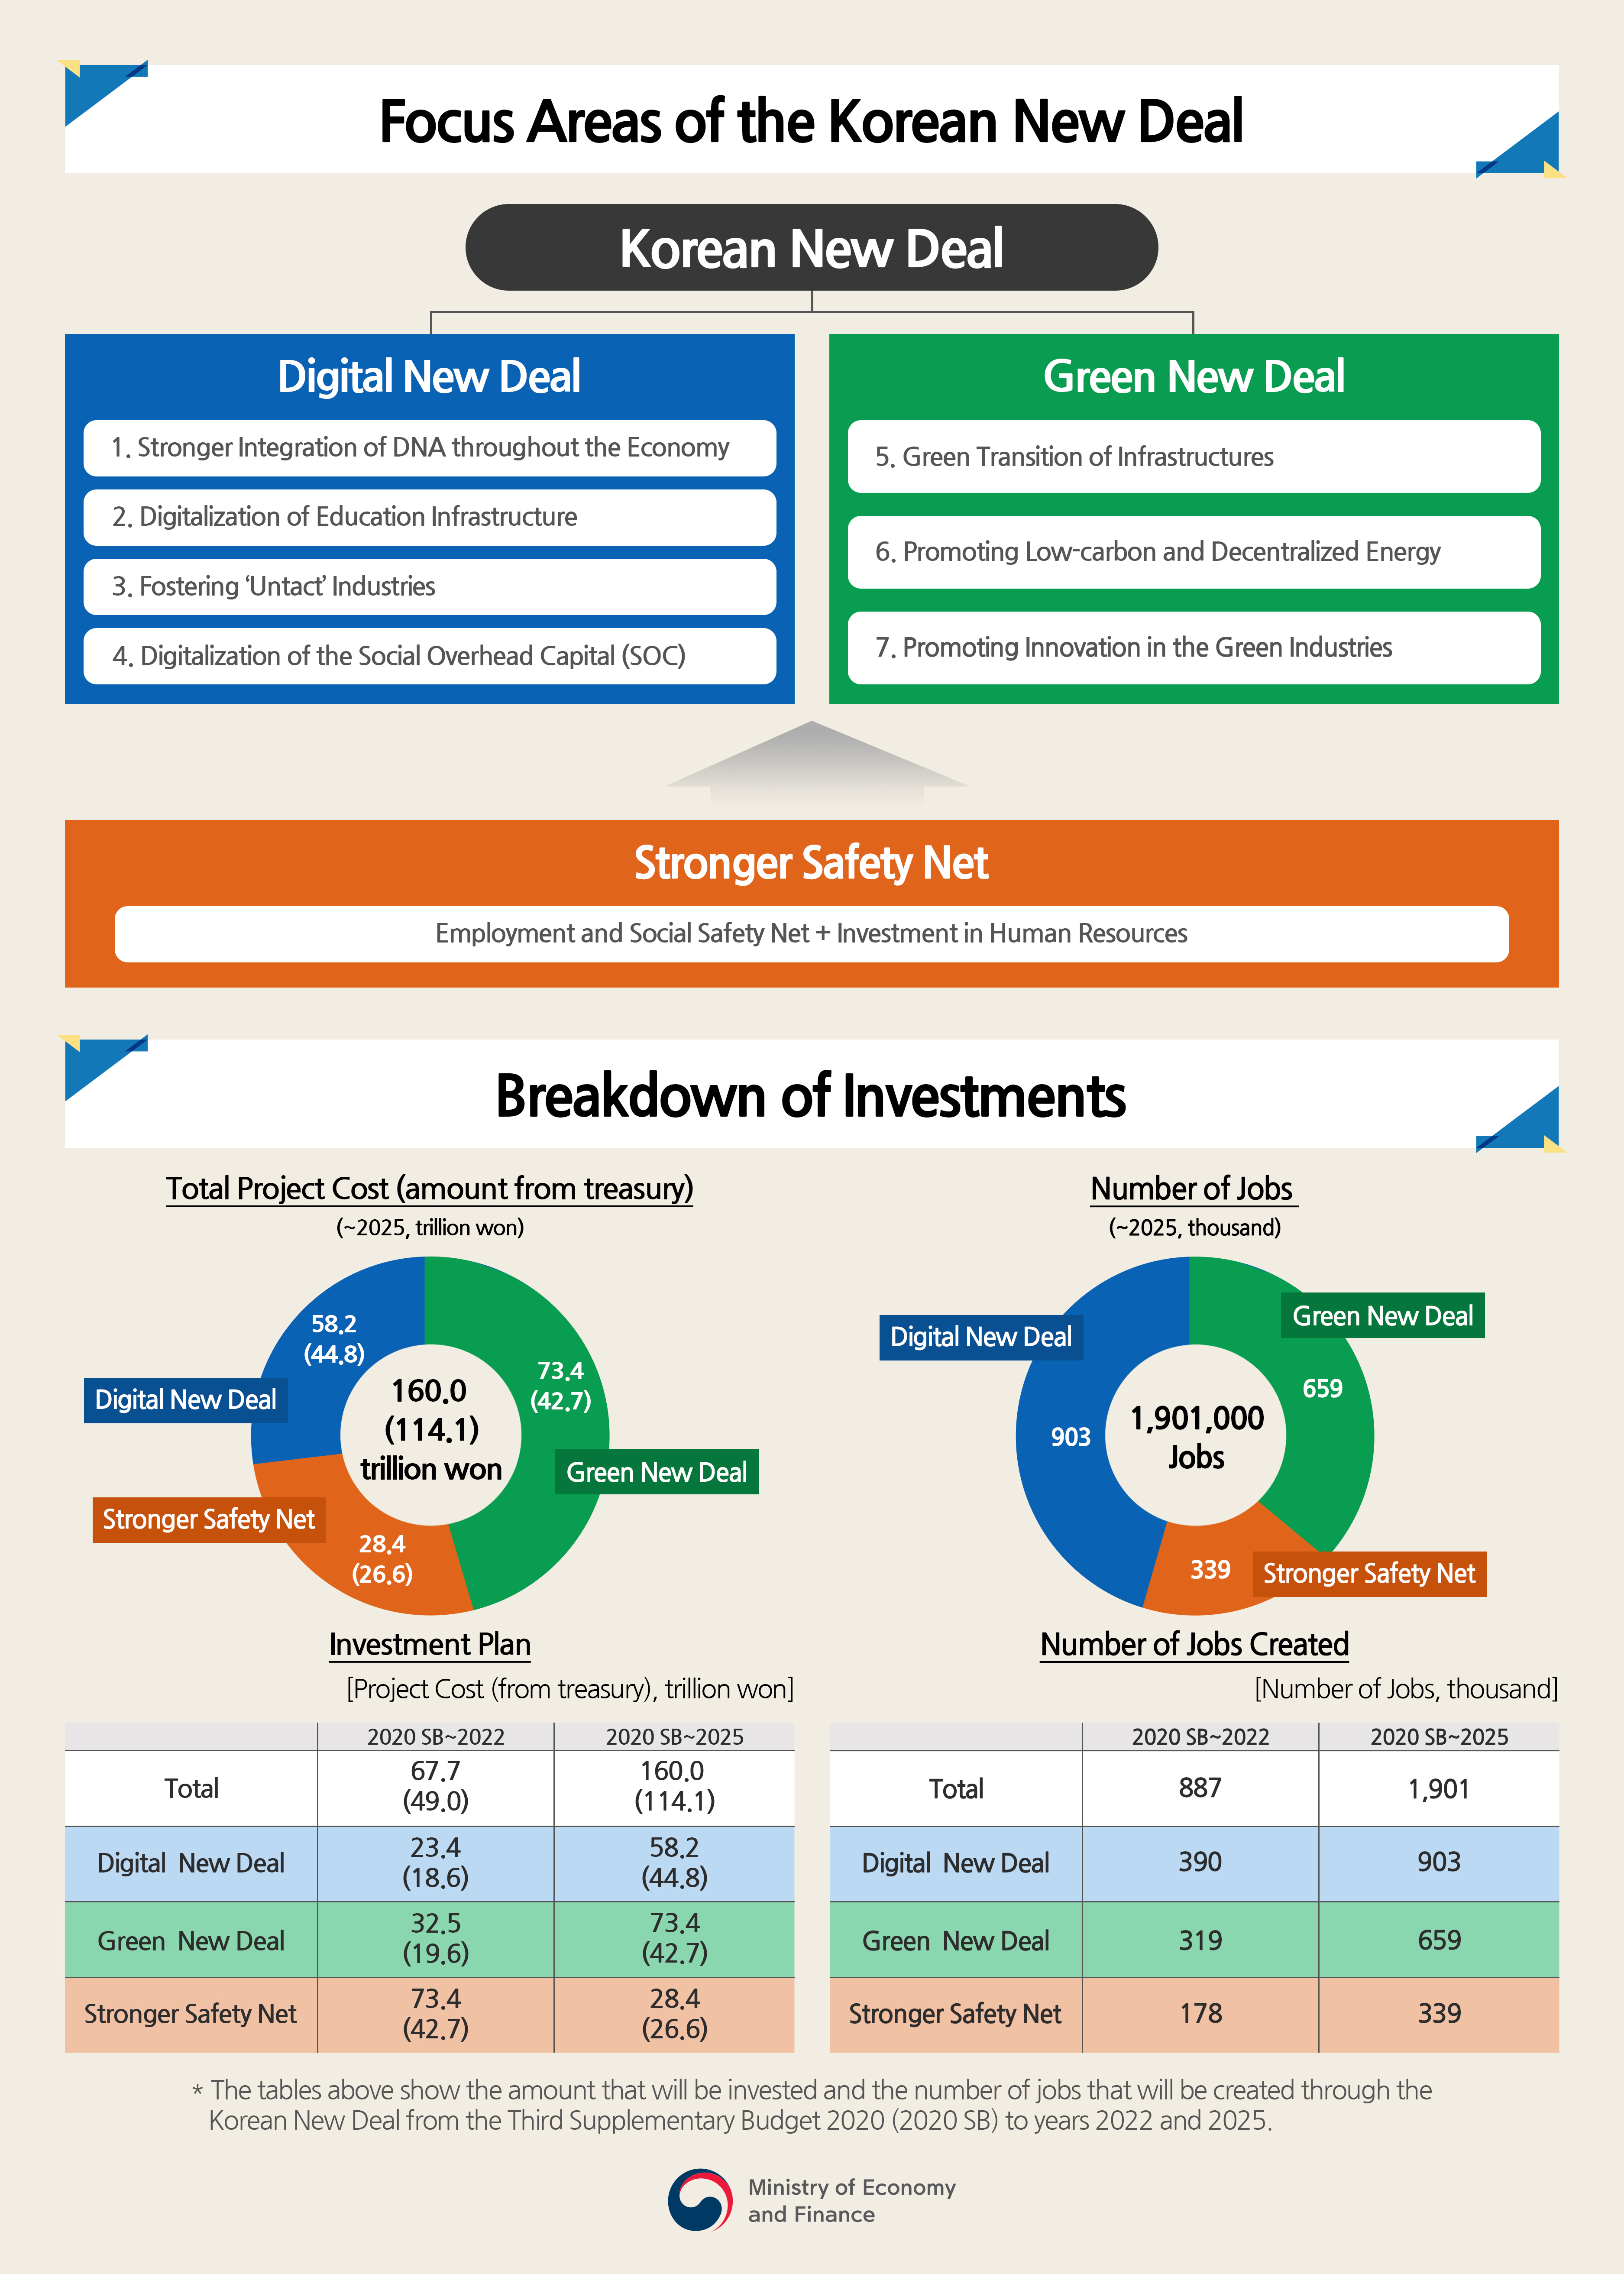 Focus Areas of the Korean New Deal, Breakdown of Investments